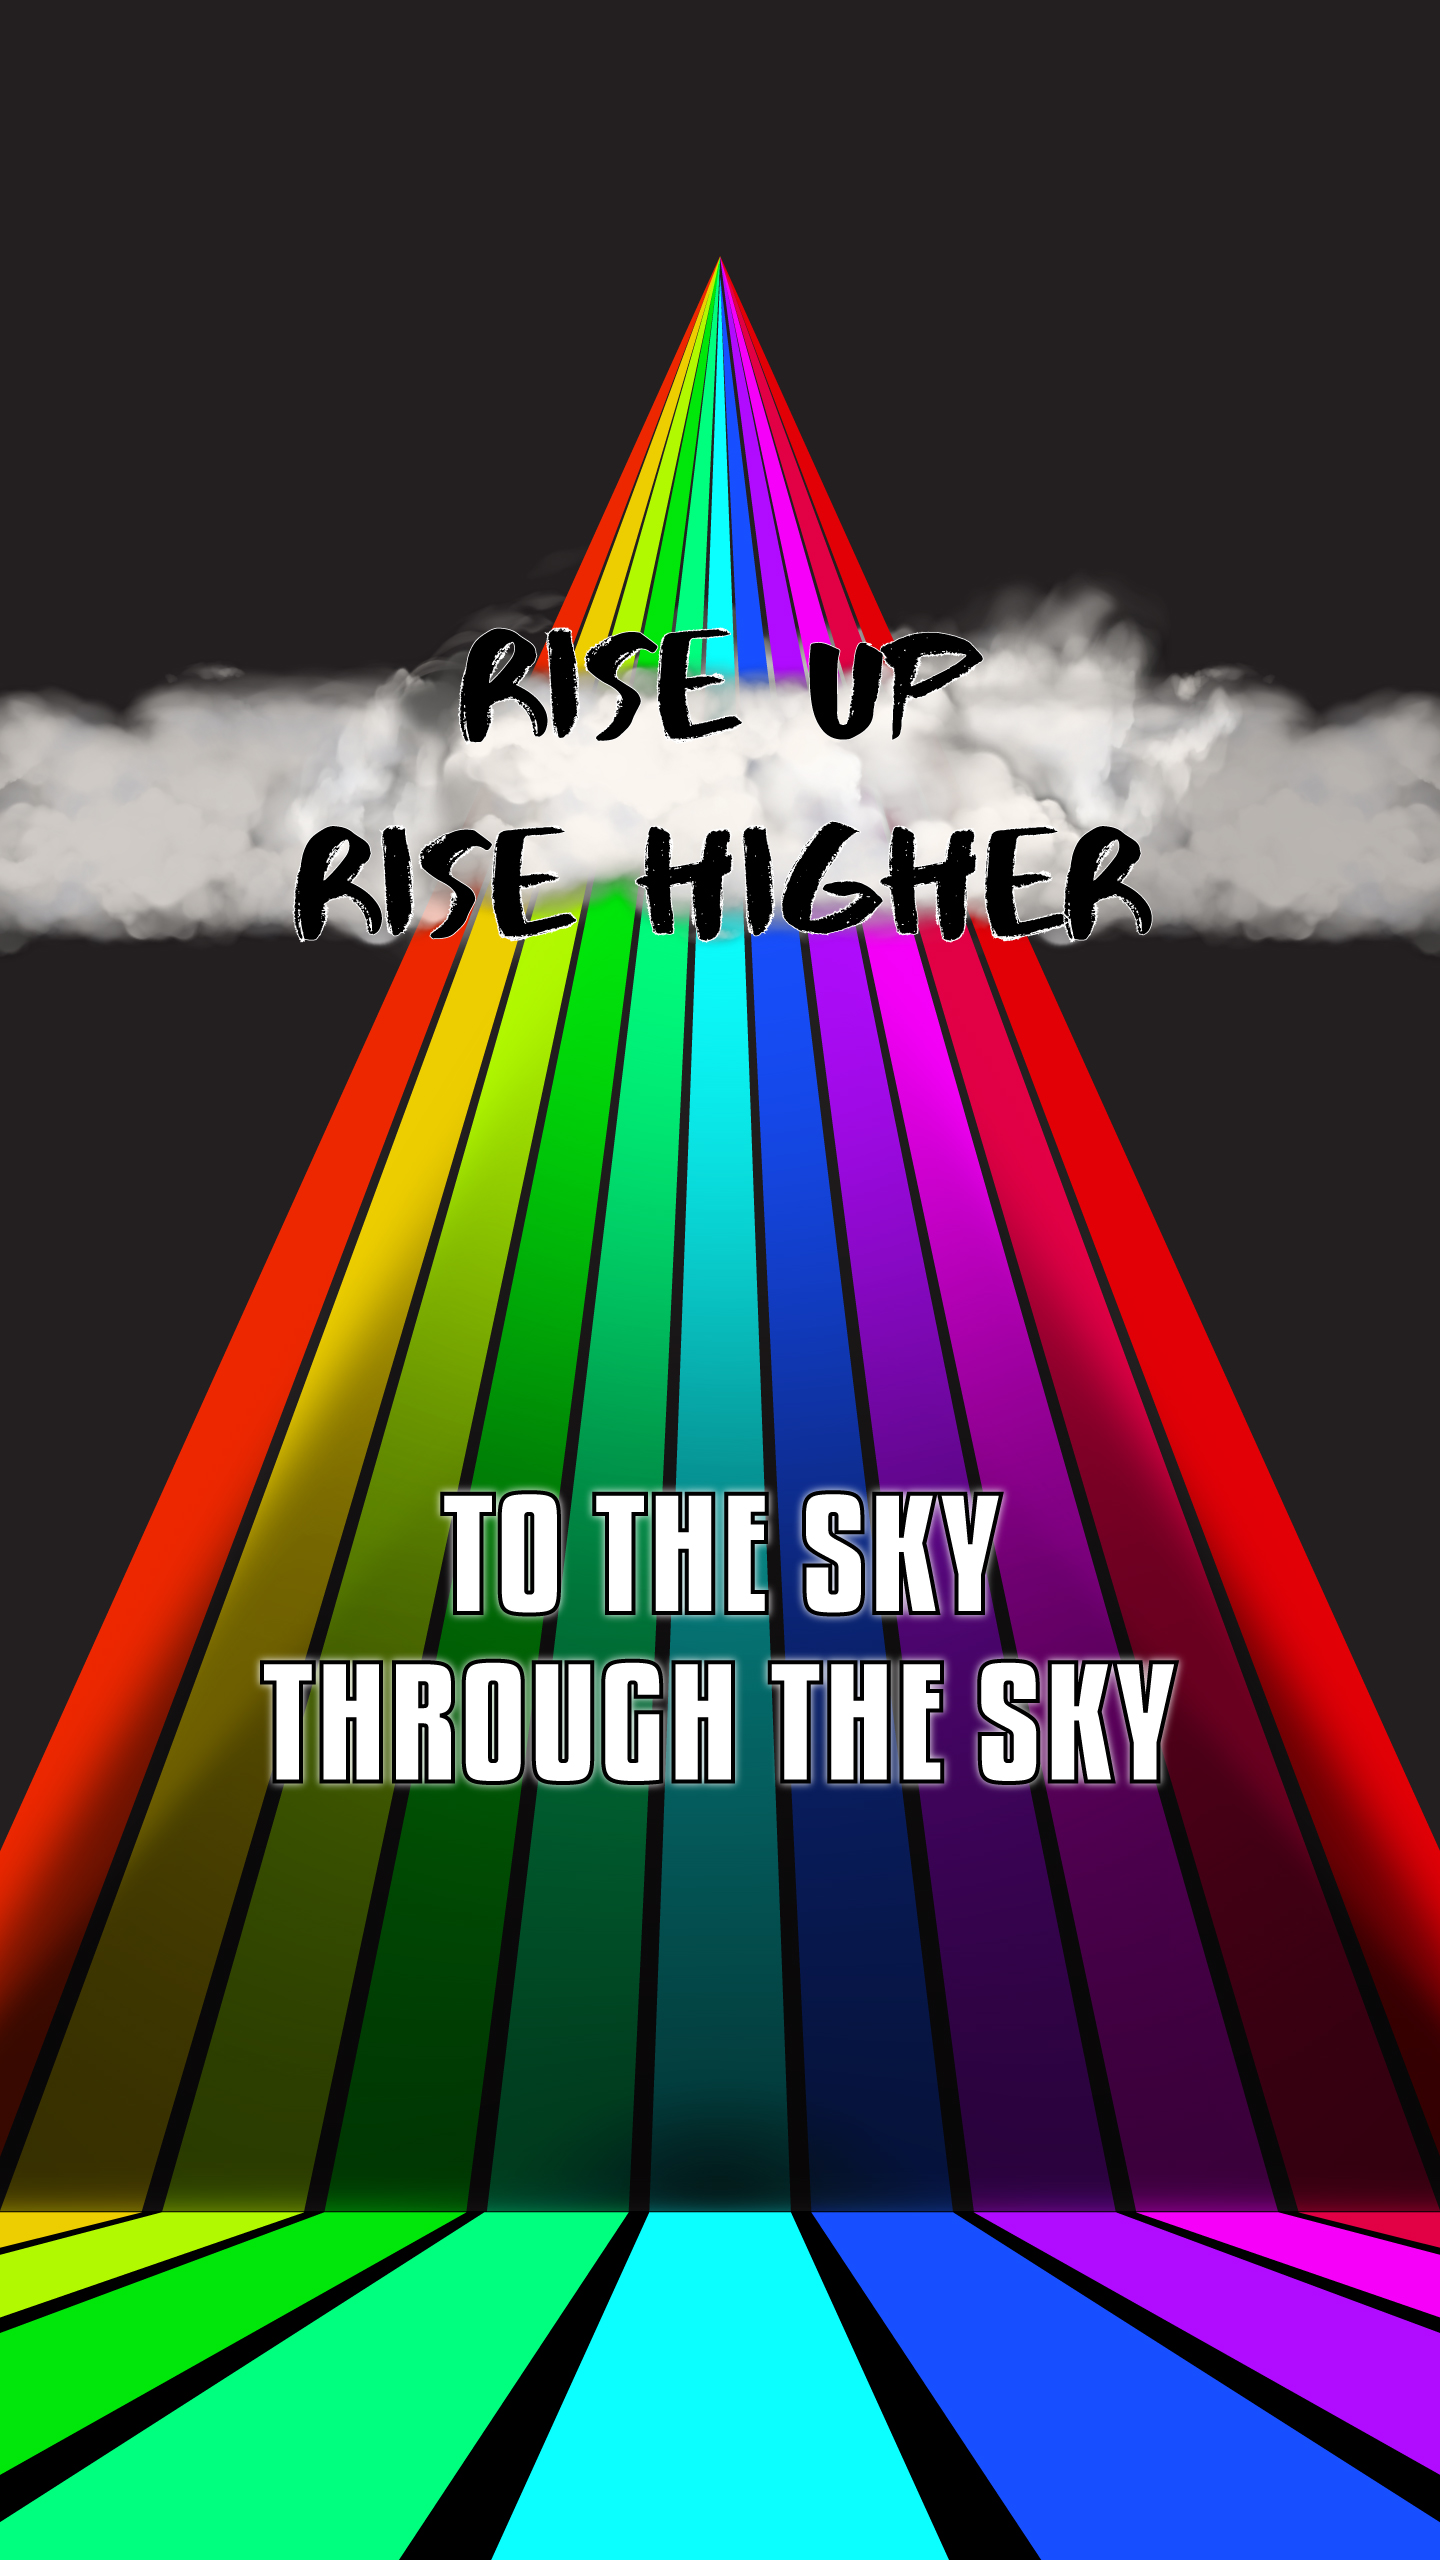 Rise Up Rise Higher #2 by Chilled_Ice.editz